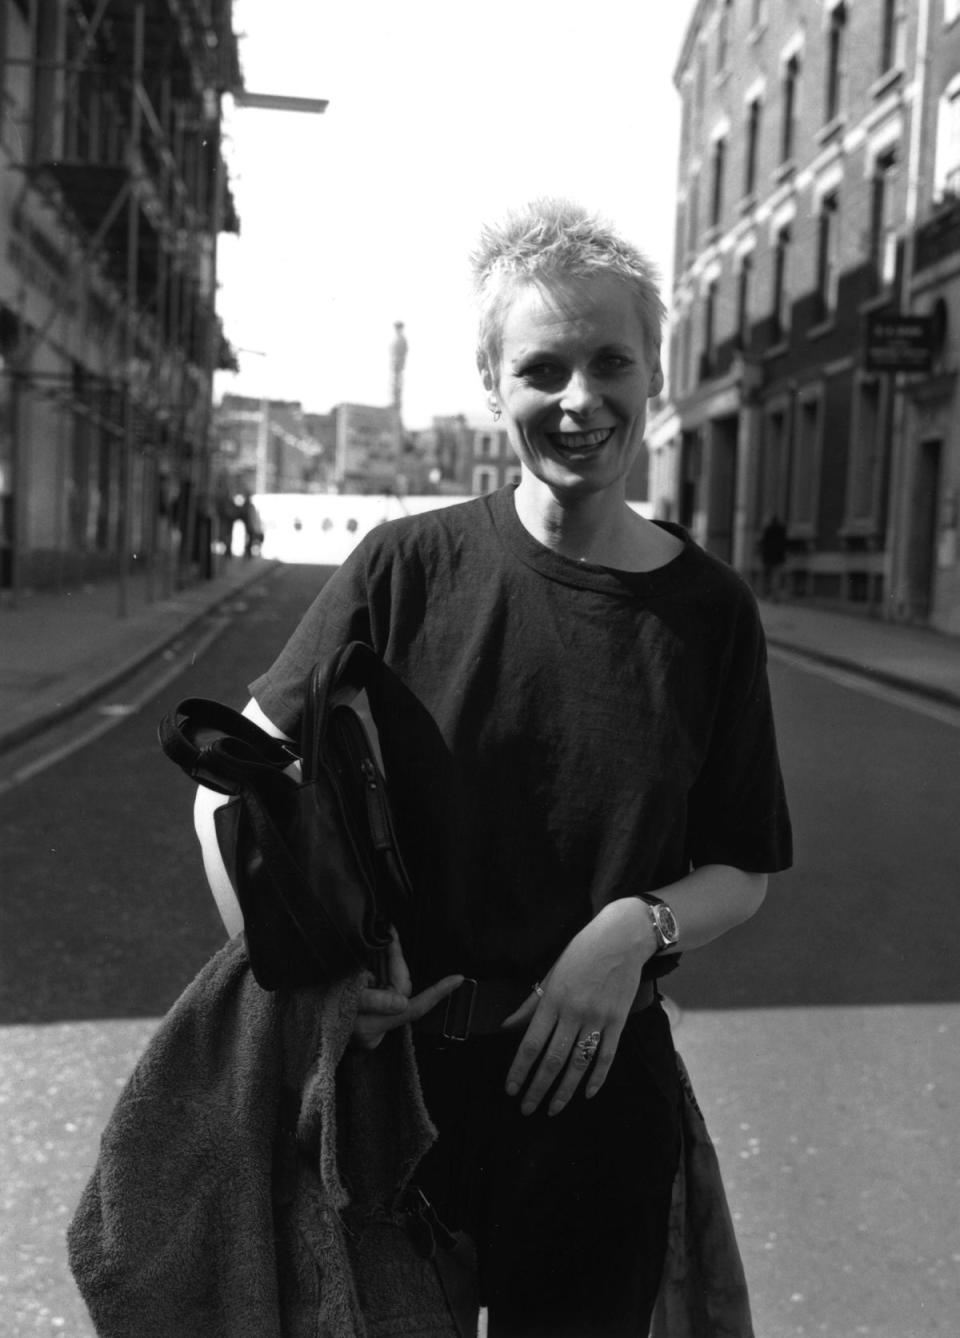 Vivienne Westwood outside Bow Street Magistrate’s Court in 1977 (Getty Images)